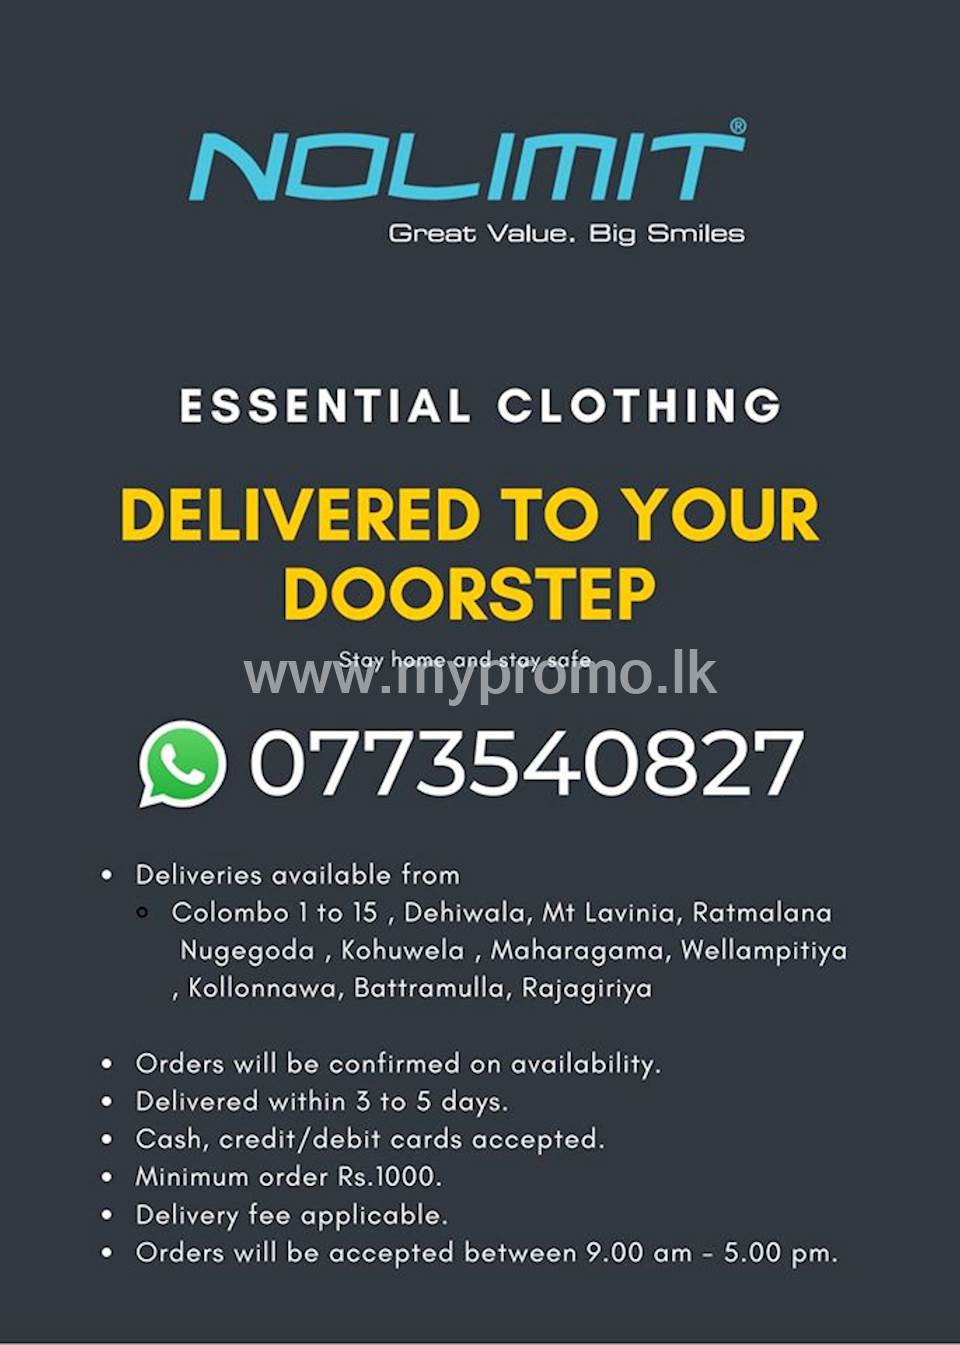 Essential Clothing Delivered To Your Doorstep From Nolimit